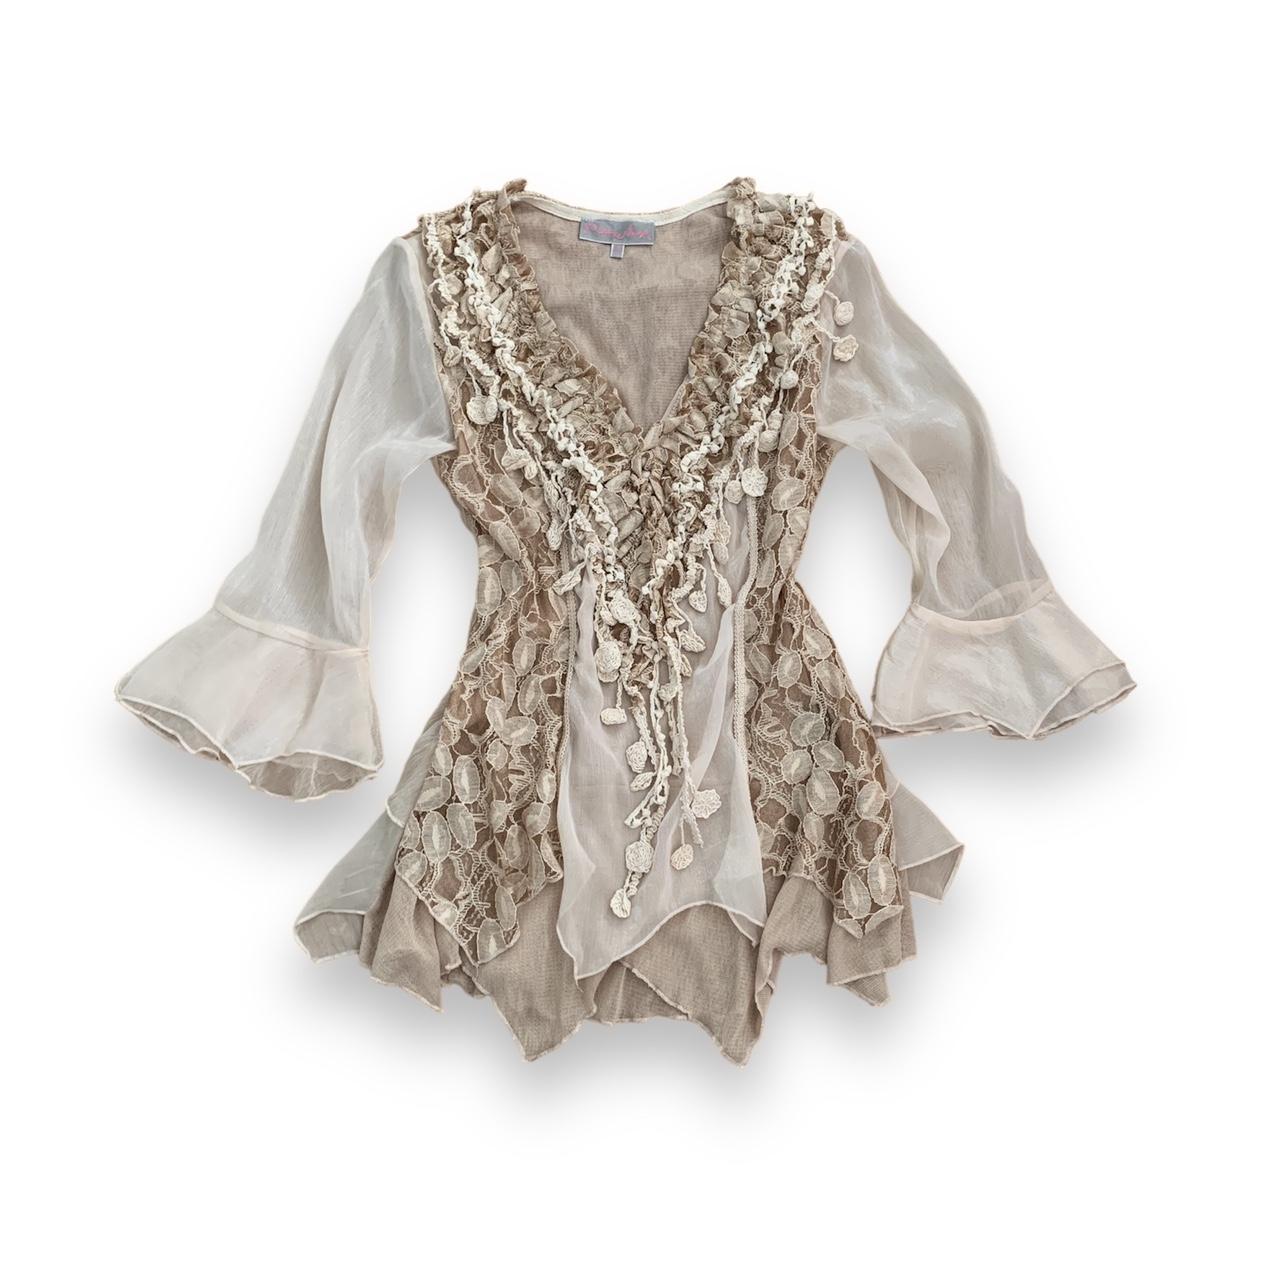 White Lace Ruffle Corset Top - Angelic Belle